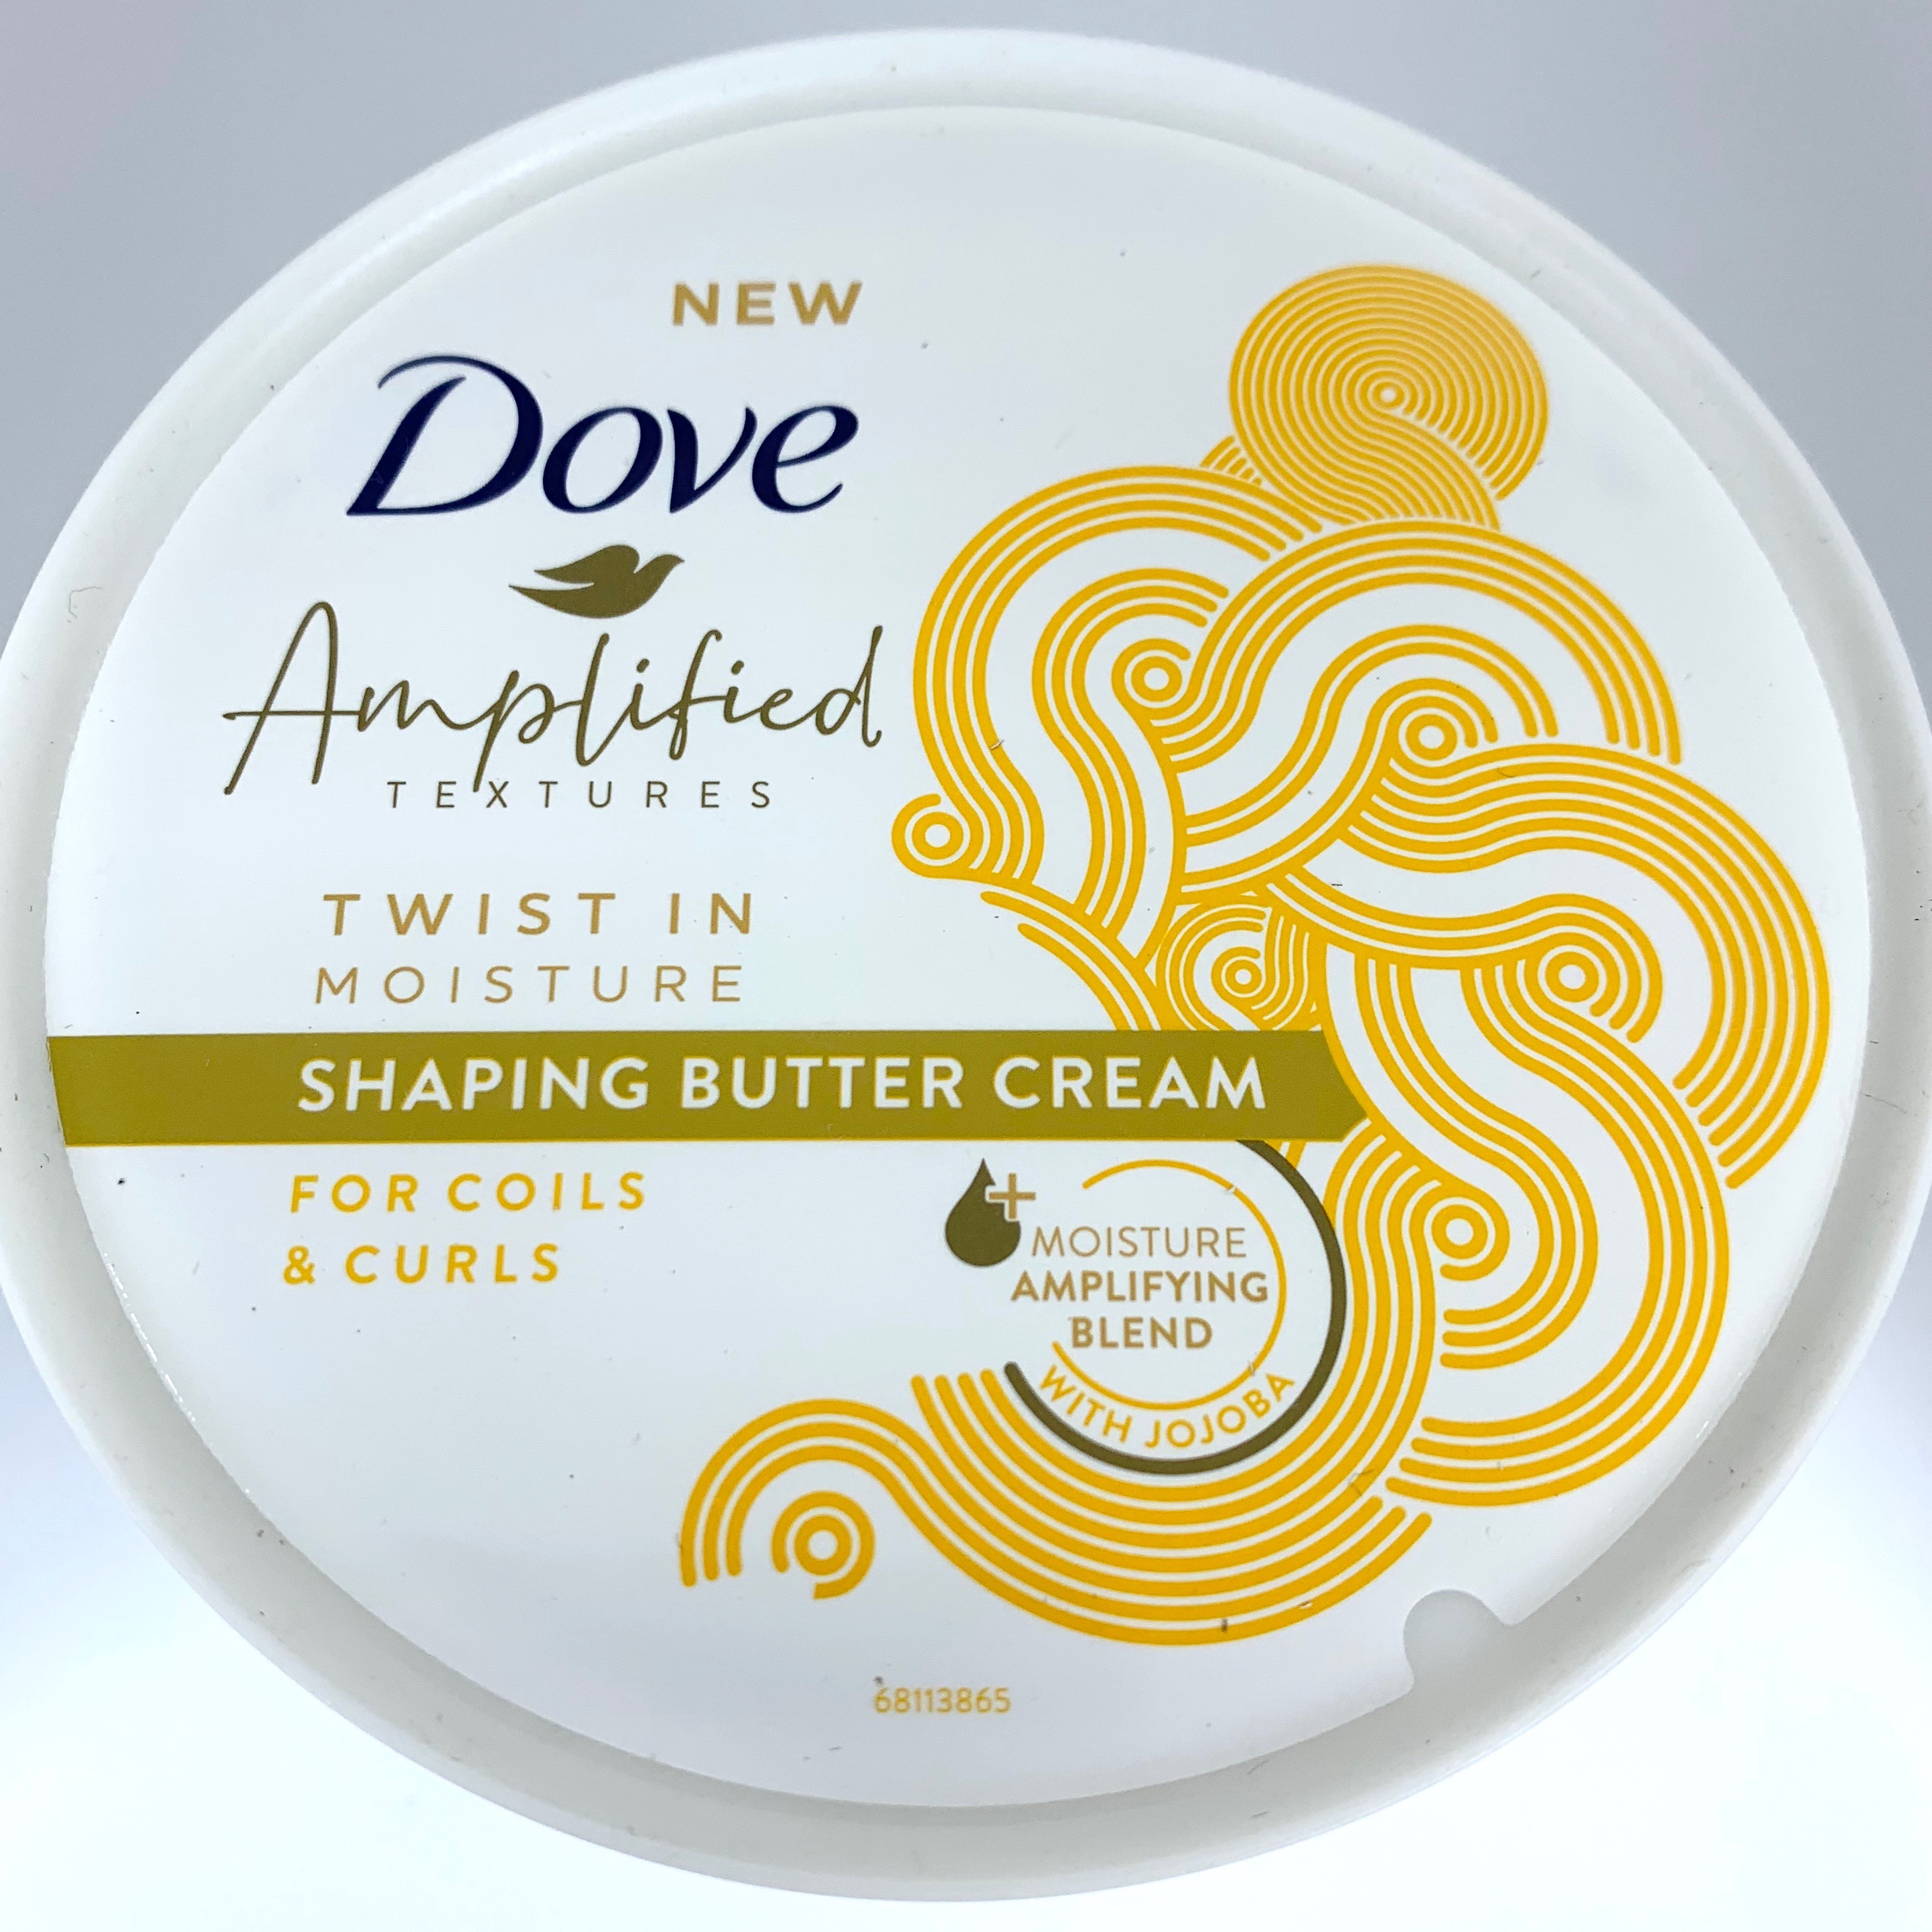 Dove Amplified Textures Twist-In Moisture Shaping Butter Cream Top for Cocotique April 2020